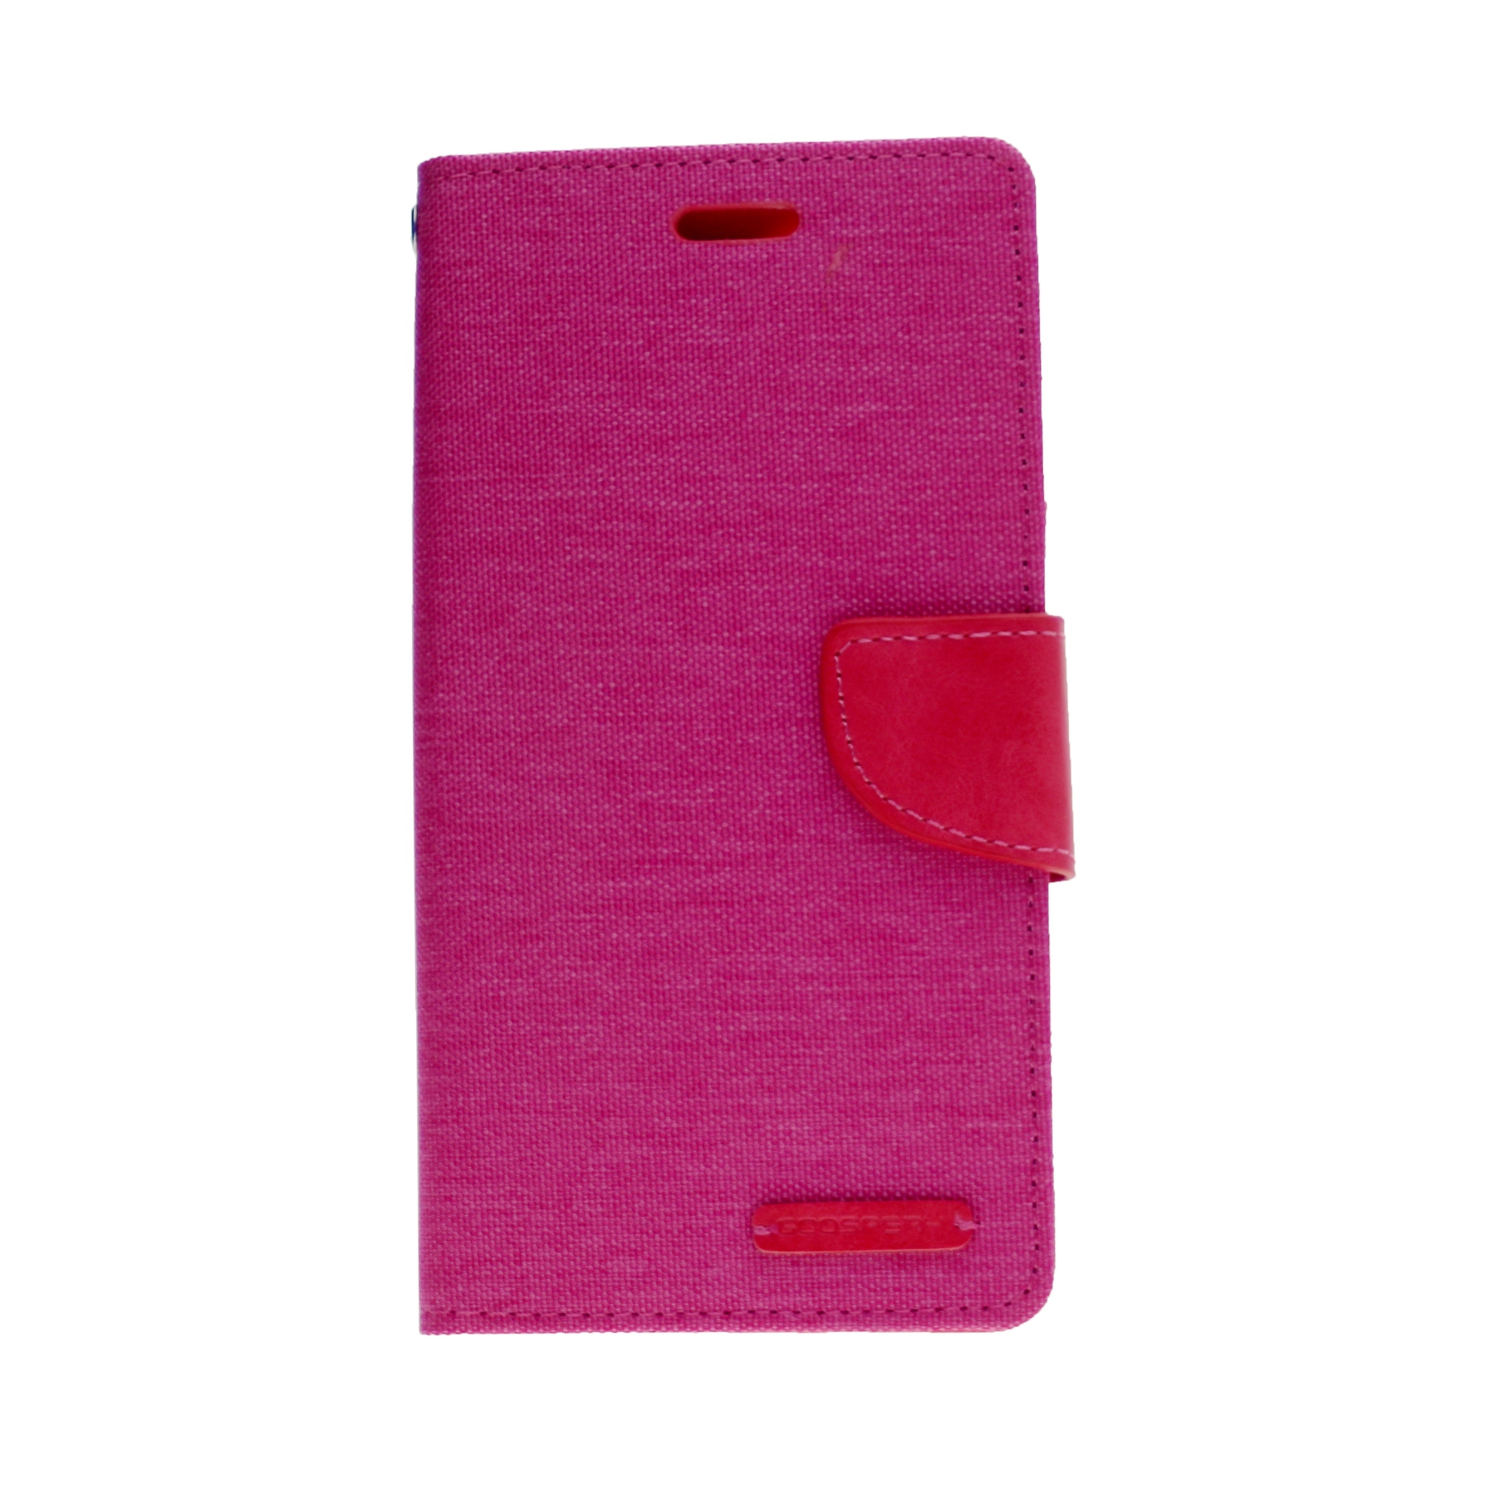 TopSave Goospery Canvas Diary Case For Iphone 12 Mini, Pink